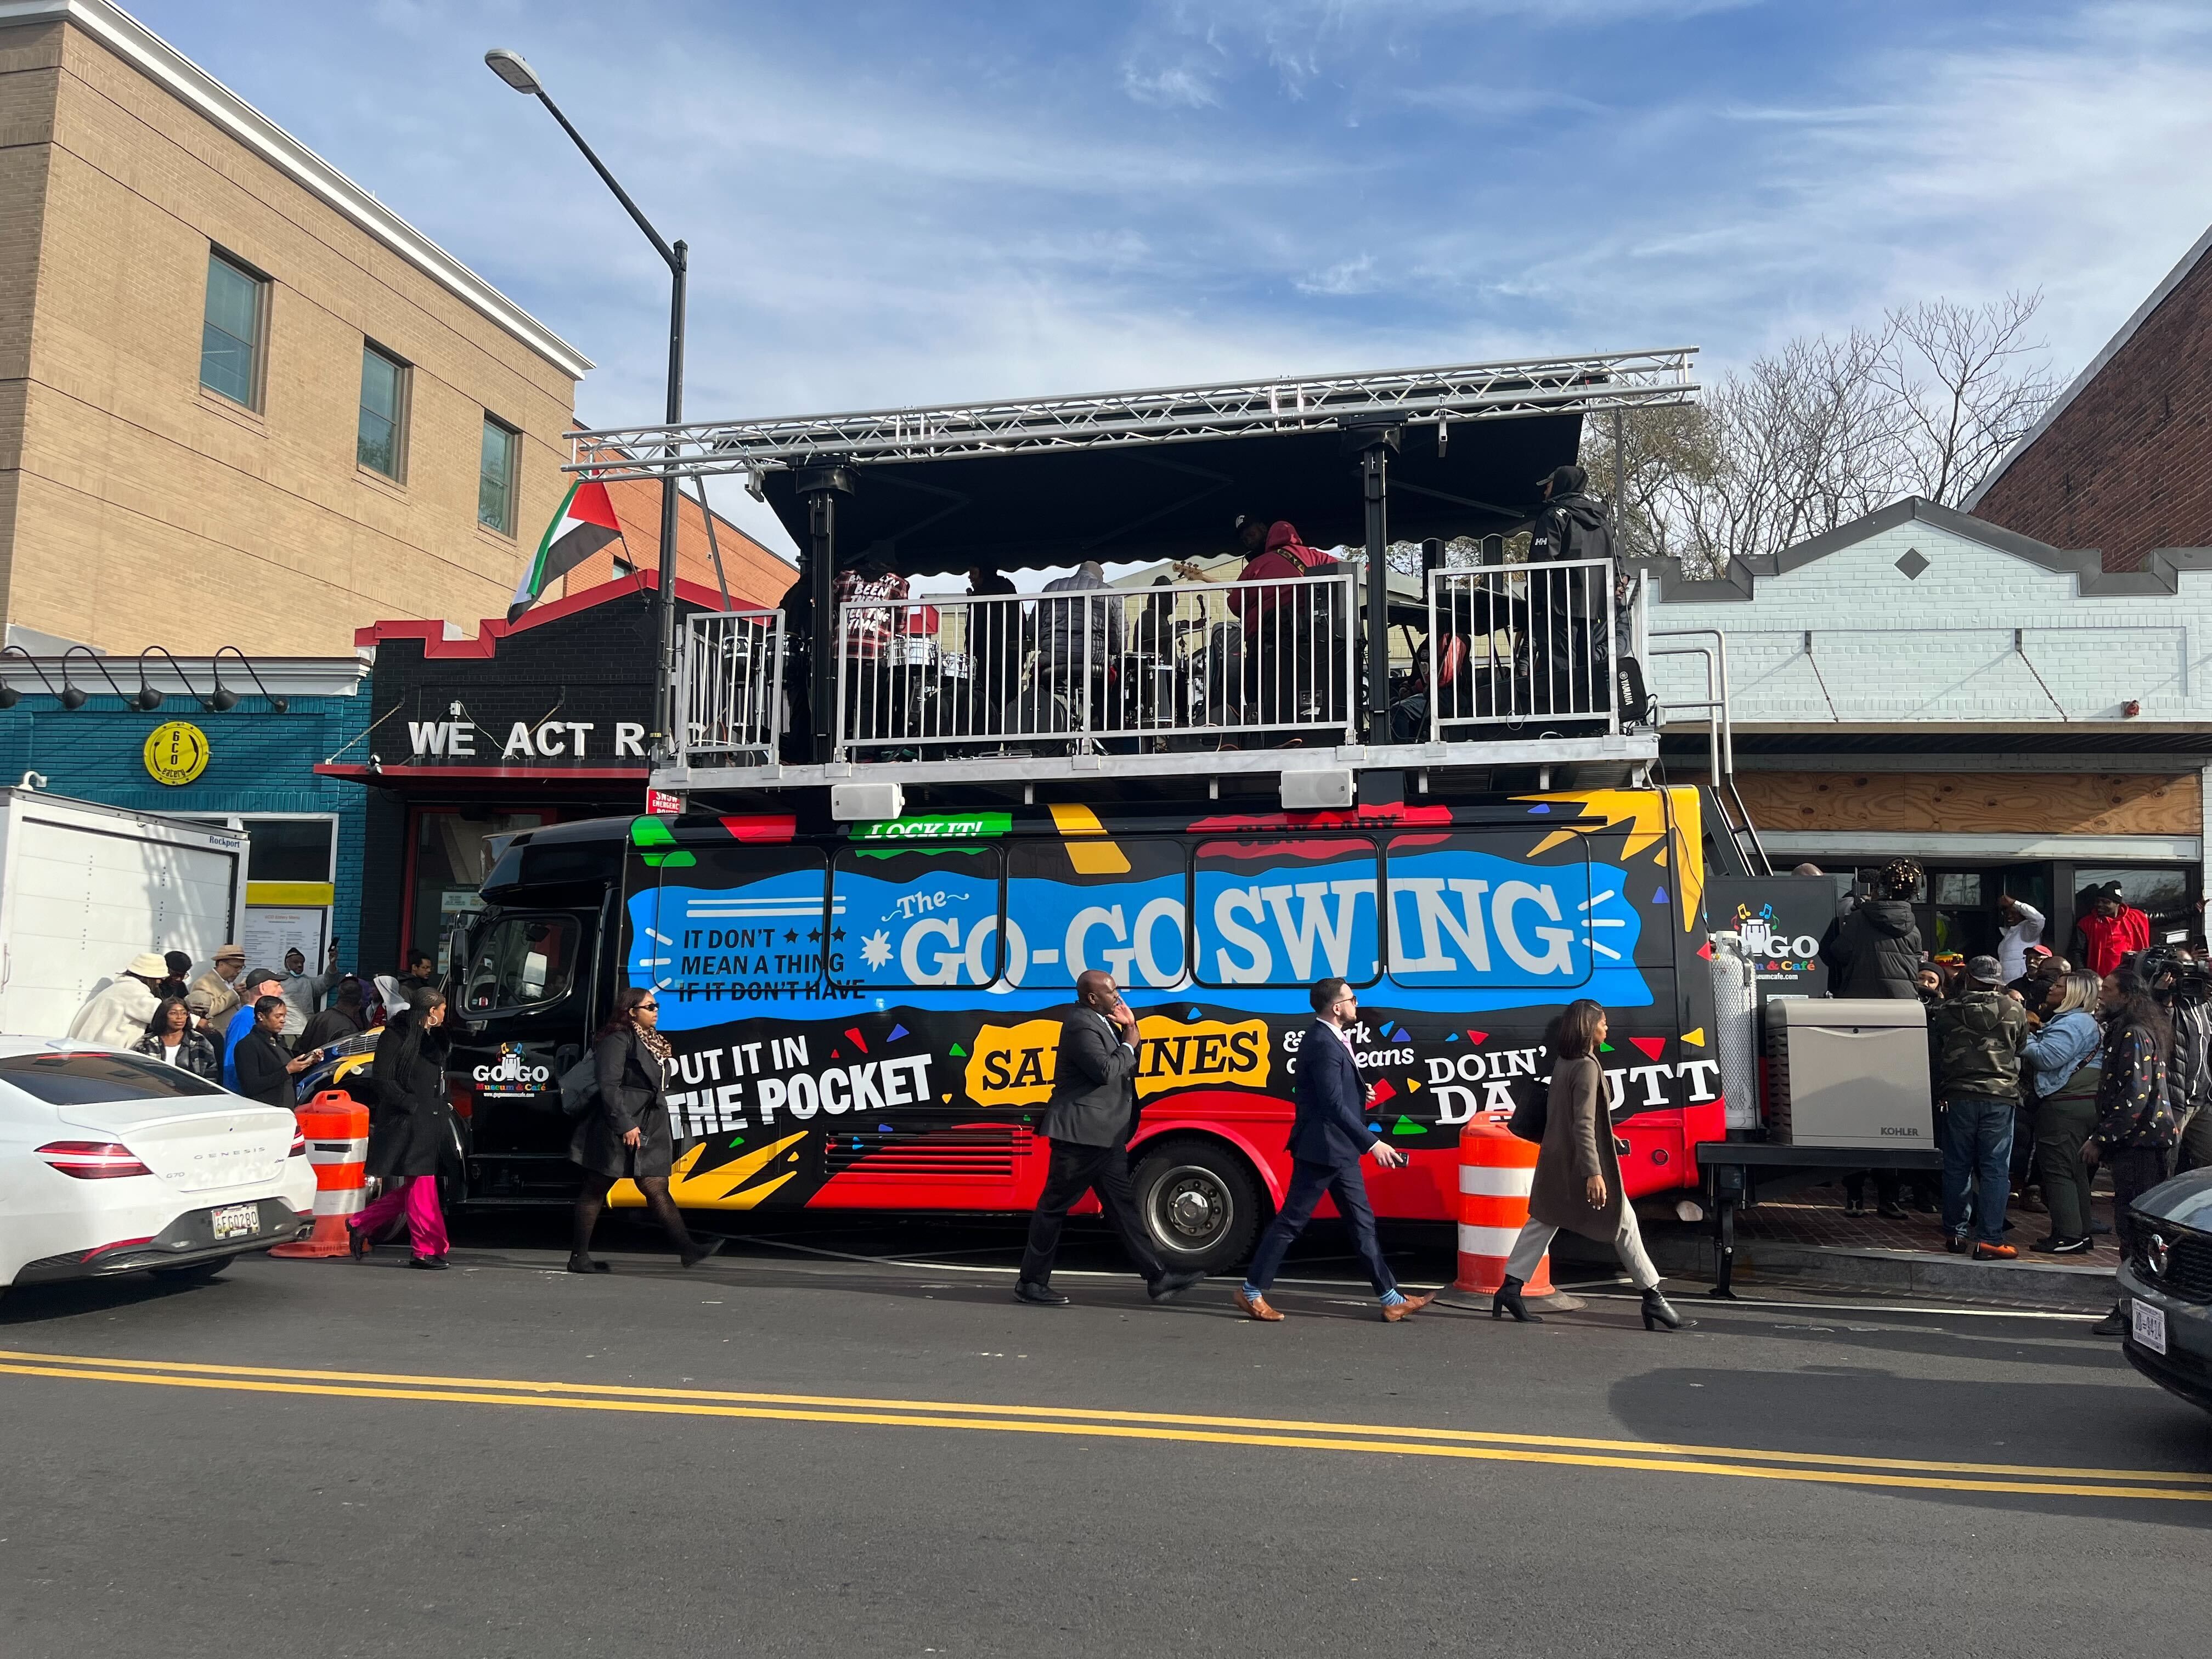 A giant bus that says "Go-Go Swing" on the side, parked on a street in D.C.